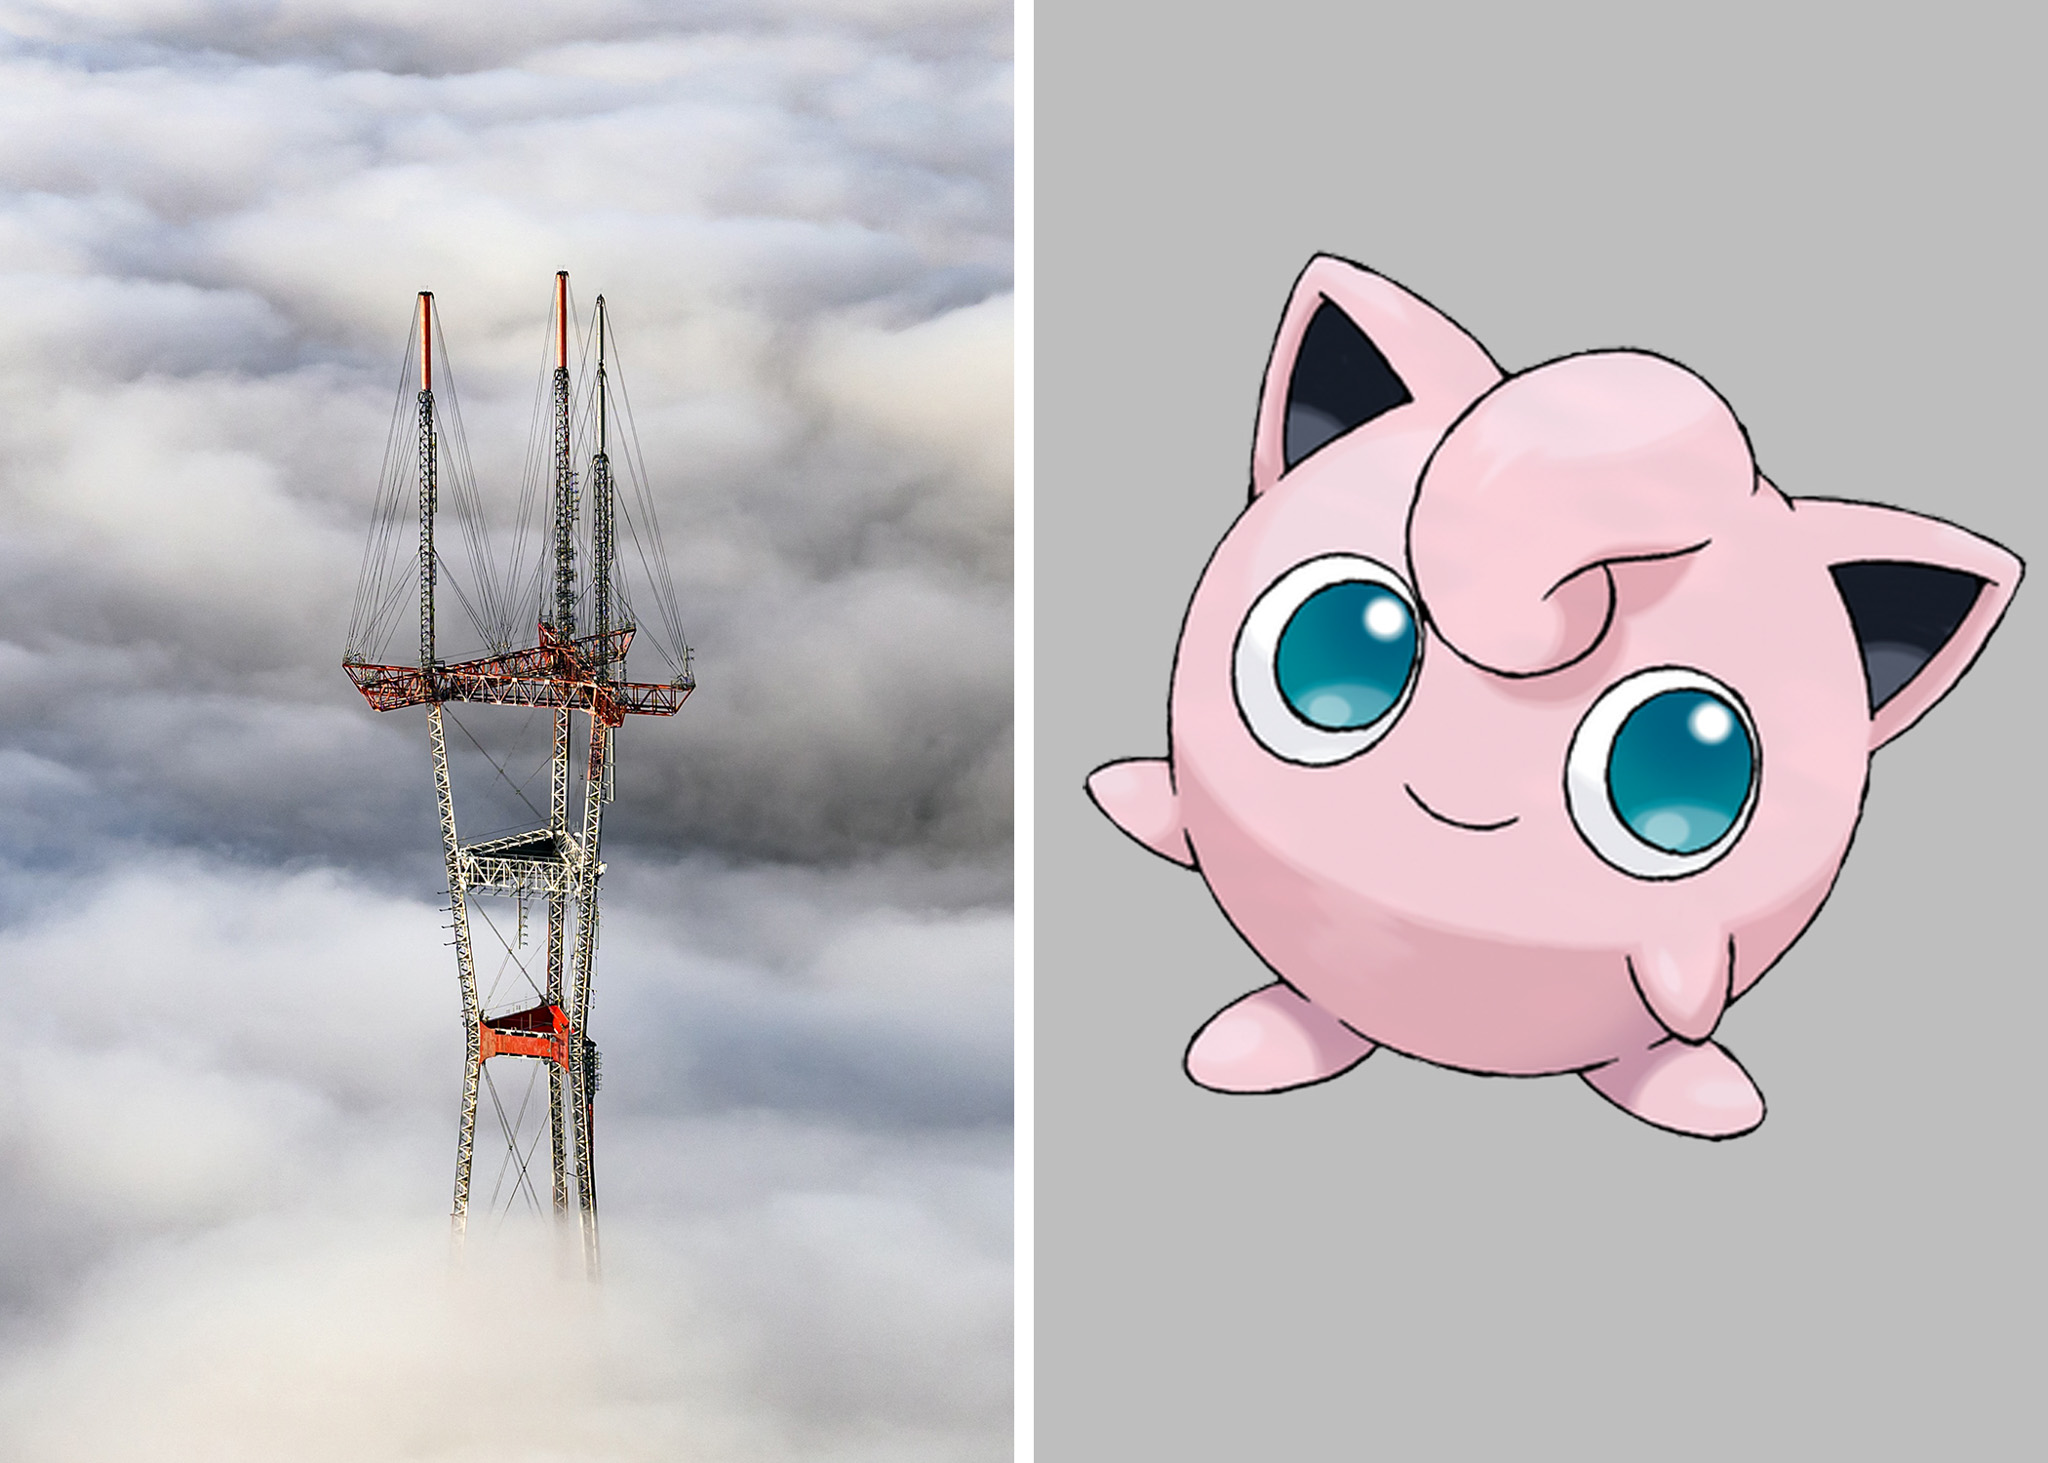 The image is split into two. Left shows a tall transmission tower rising above clouds. Right features a cute, pink, round character with large blue eyes and pointy ears.